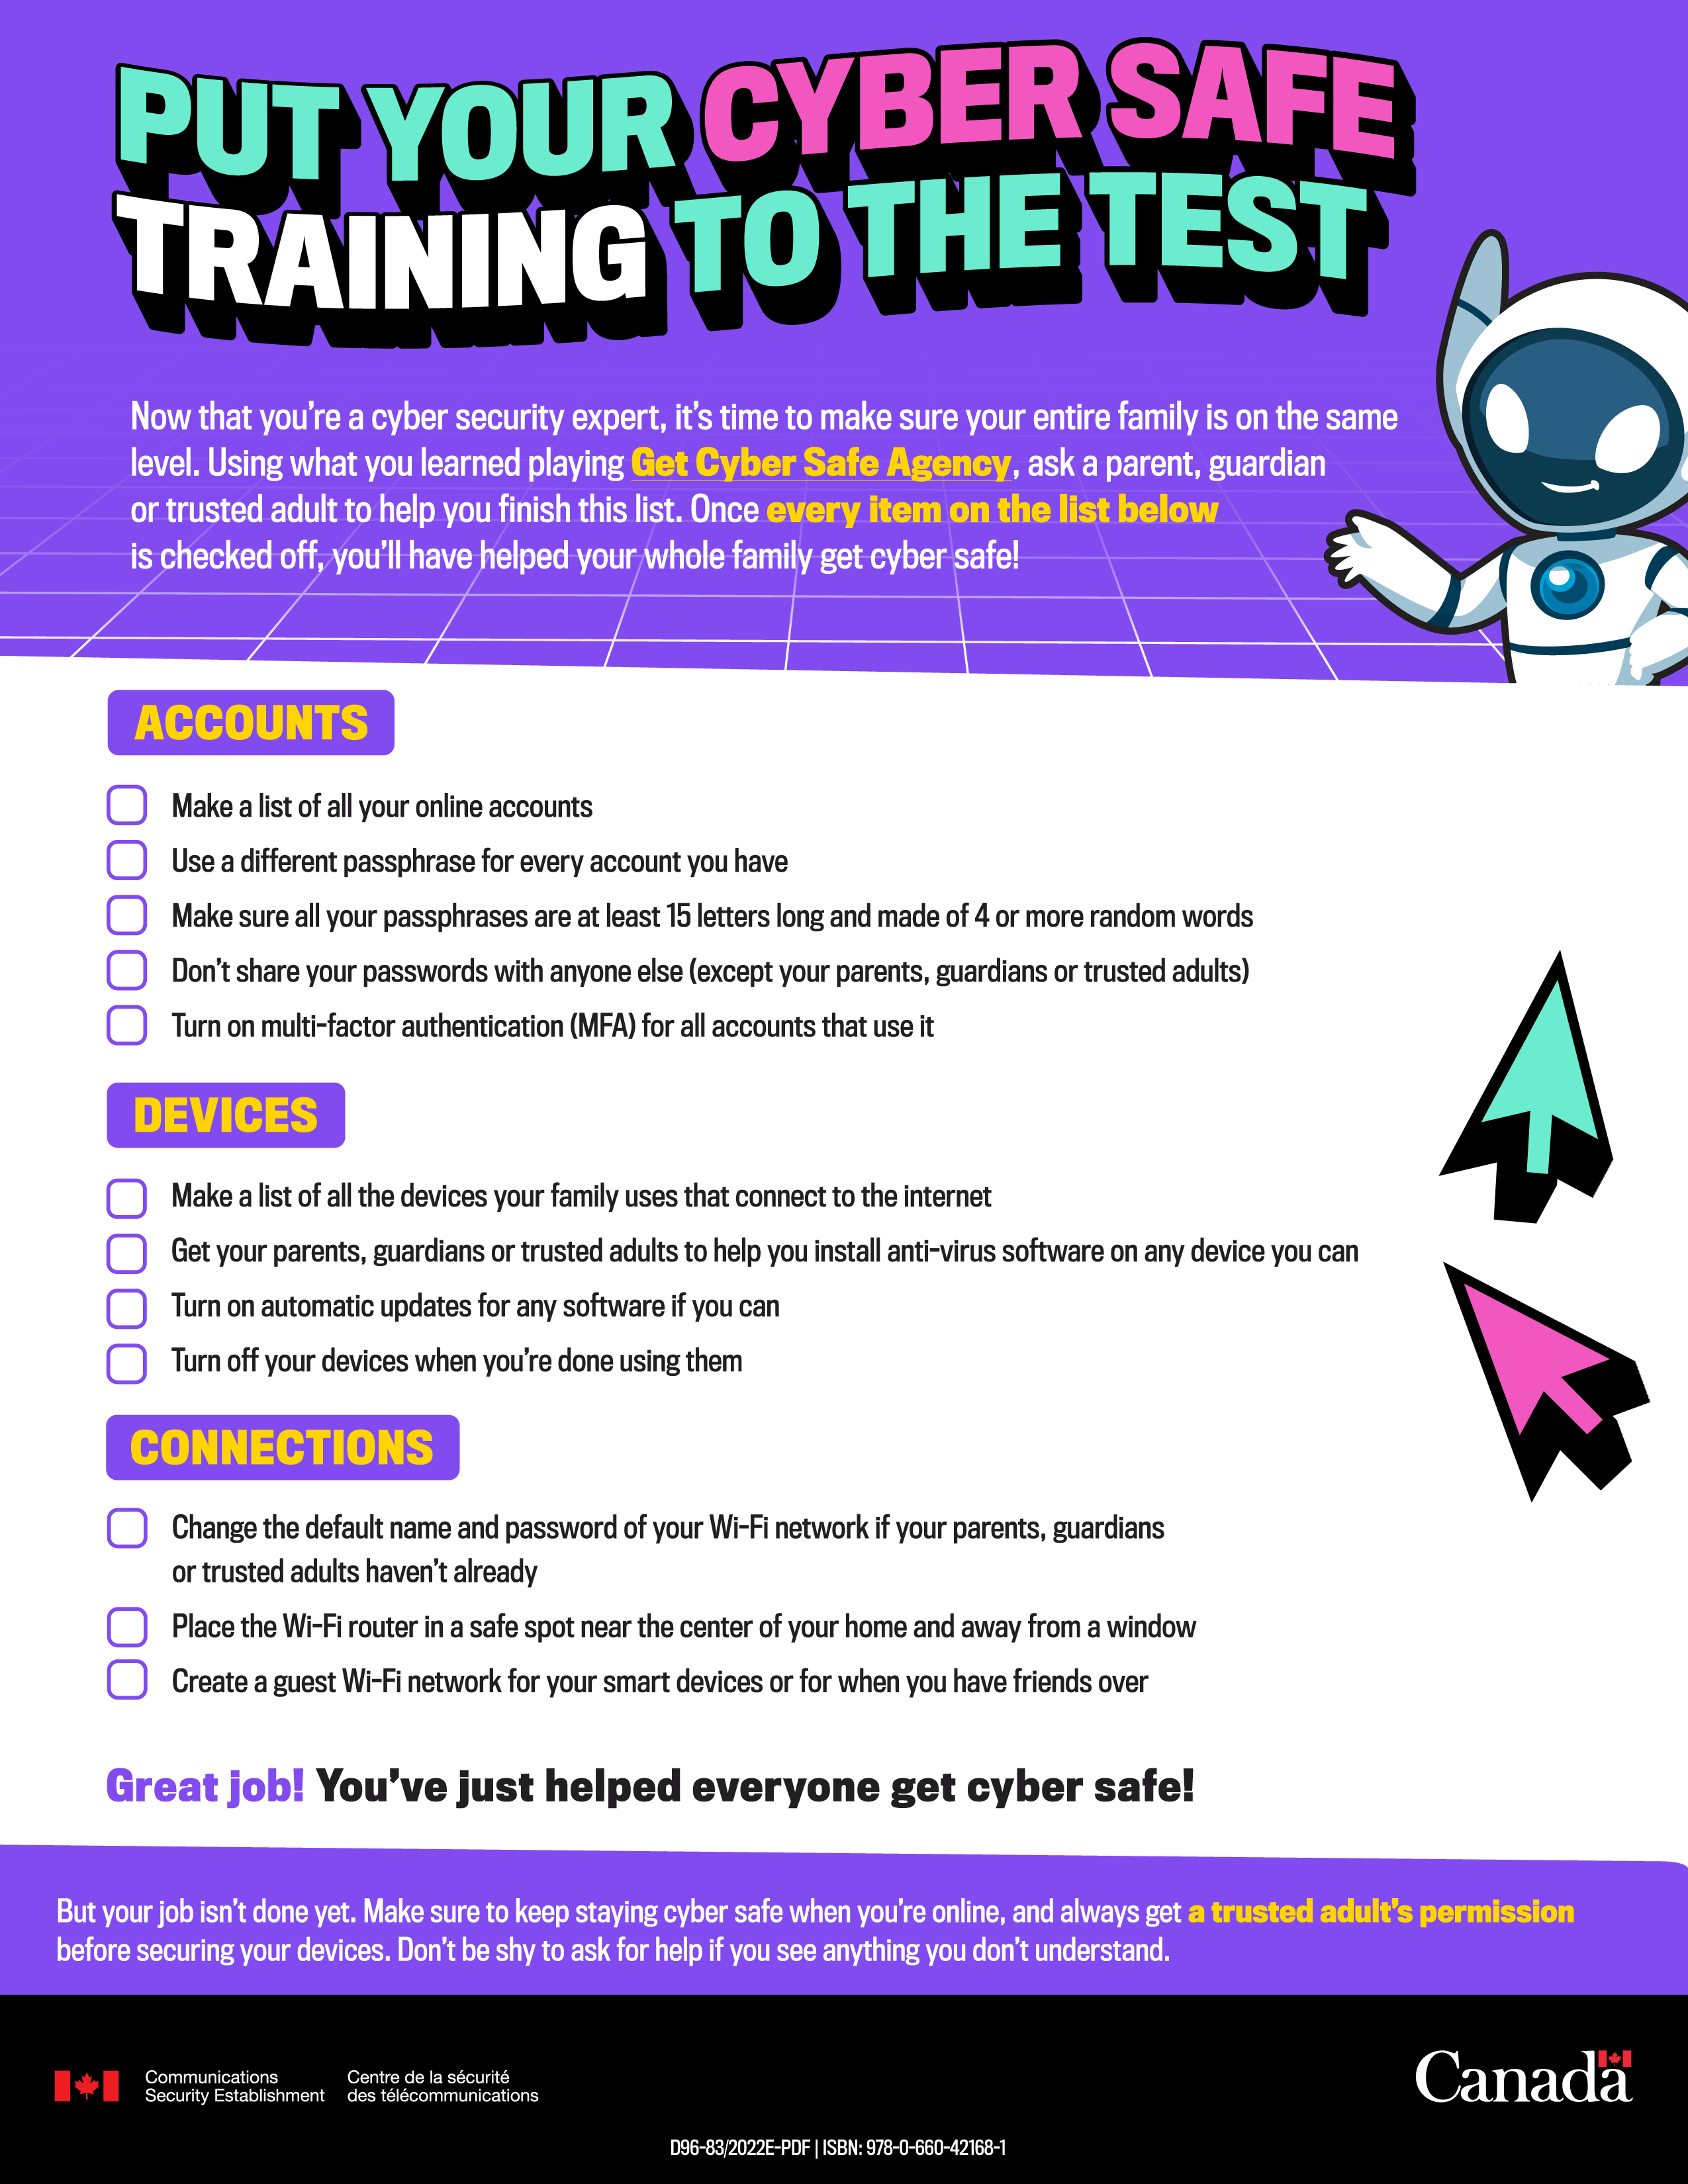 Put your cyber safe training to the test - Long description immediately follows